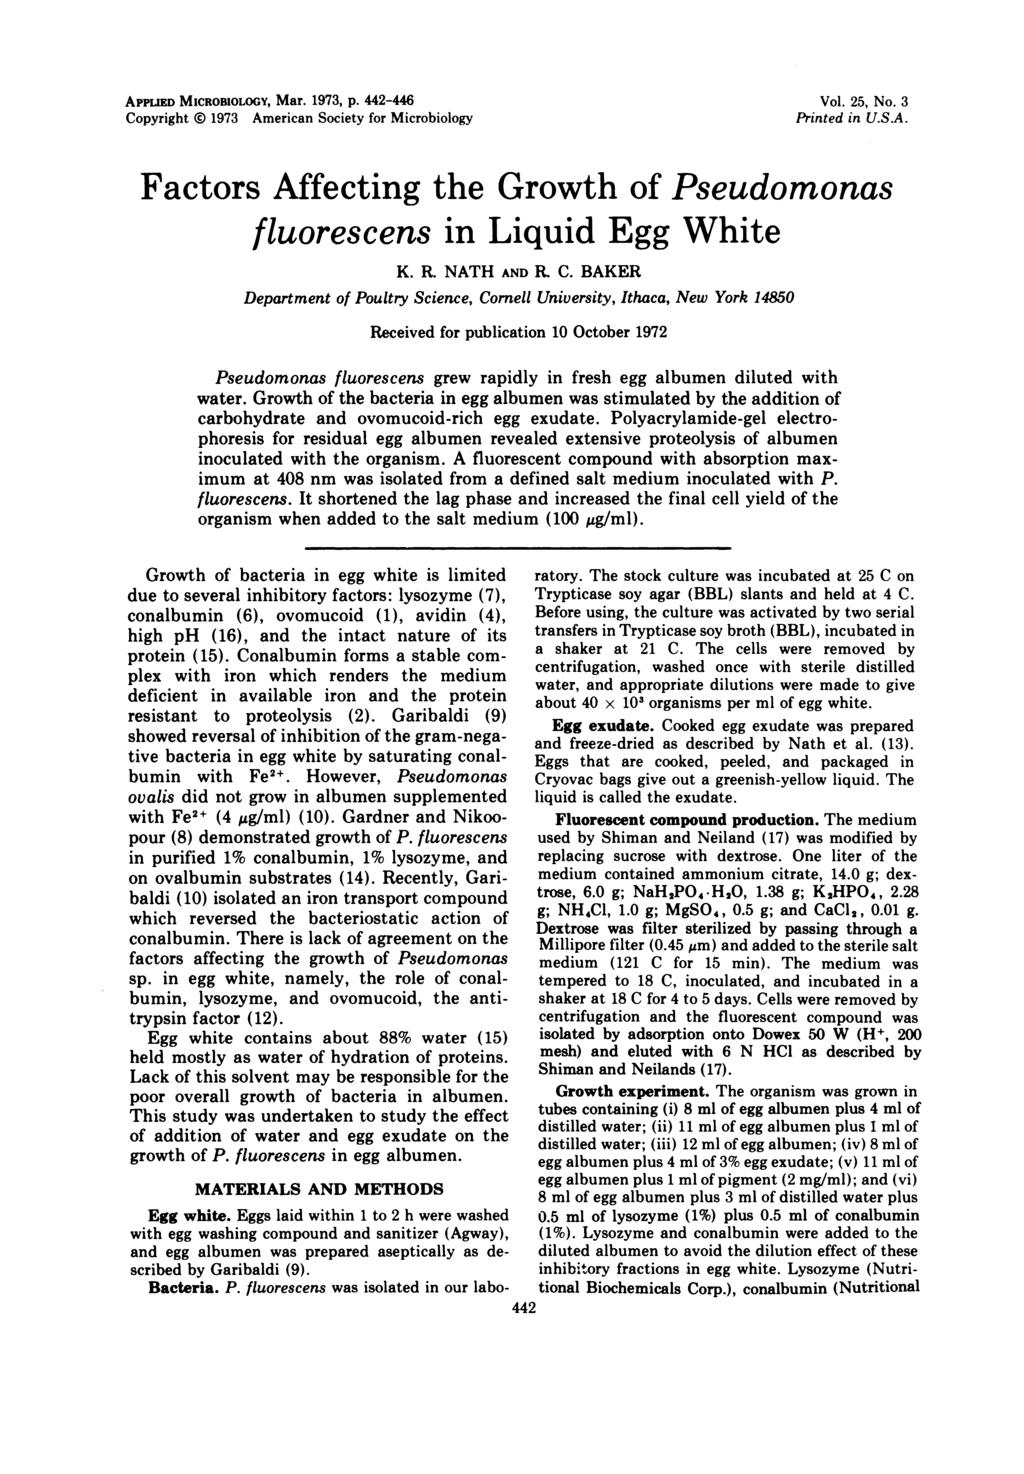 APPLIED MICROBIOLOGY, Mar. 1973, p. 442-446 Copyright 0 1973 American Society for Microbiology Vol. 25, No. 3 Printed in U.S.A. Factors Affecting the Growth of Pseudomonas fluorescens in Liquid Egg White K.